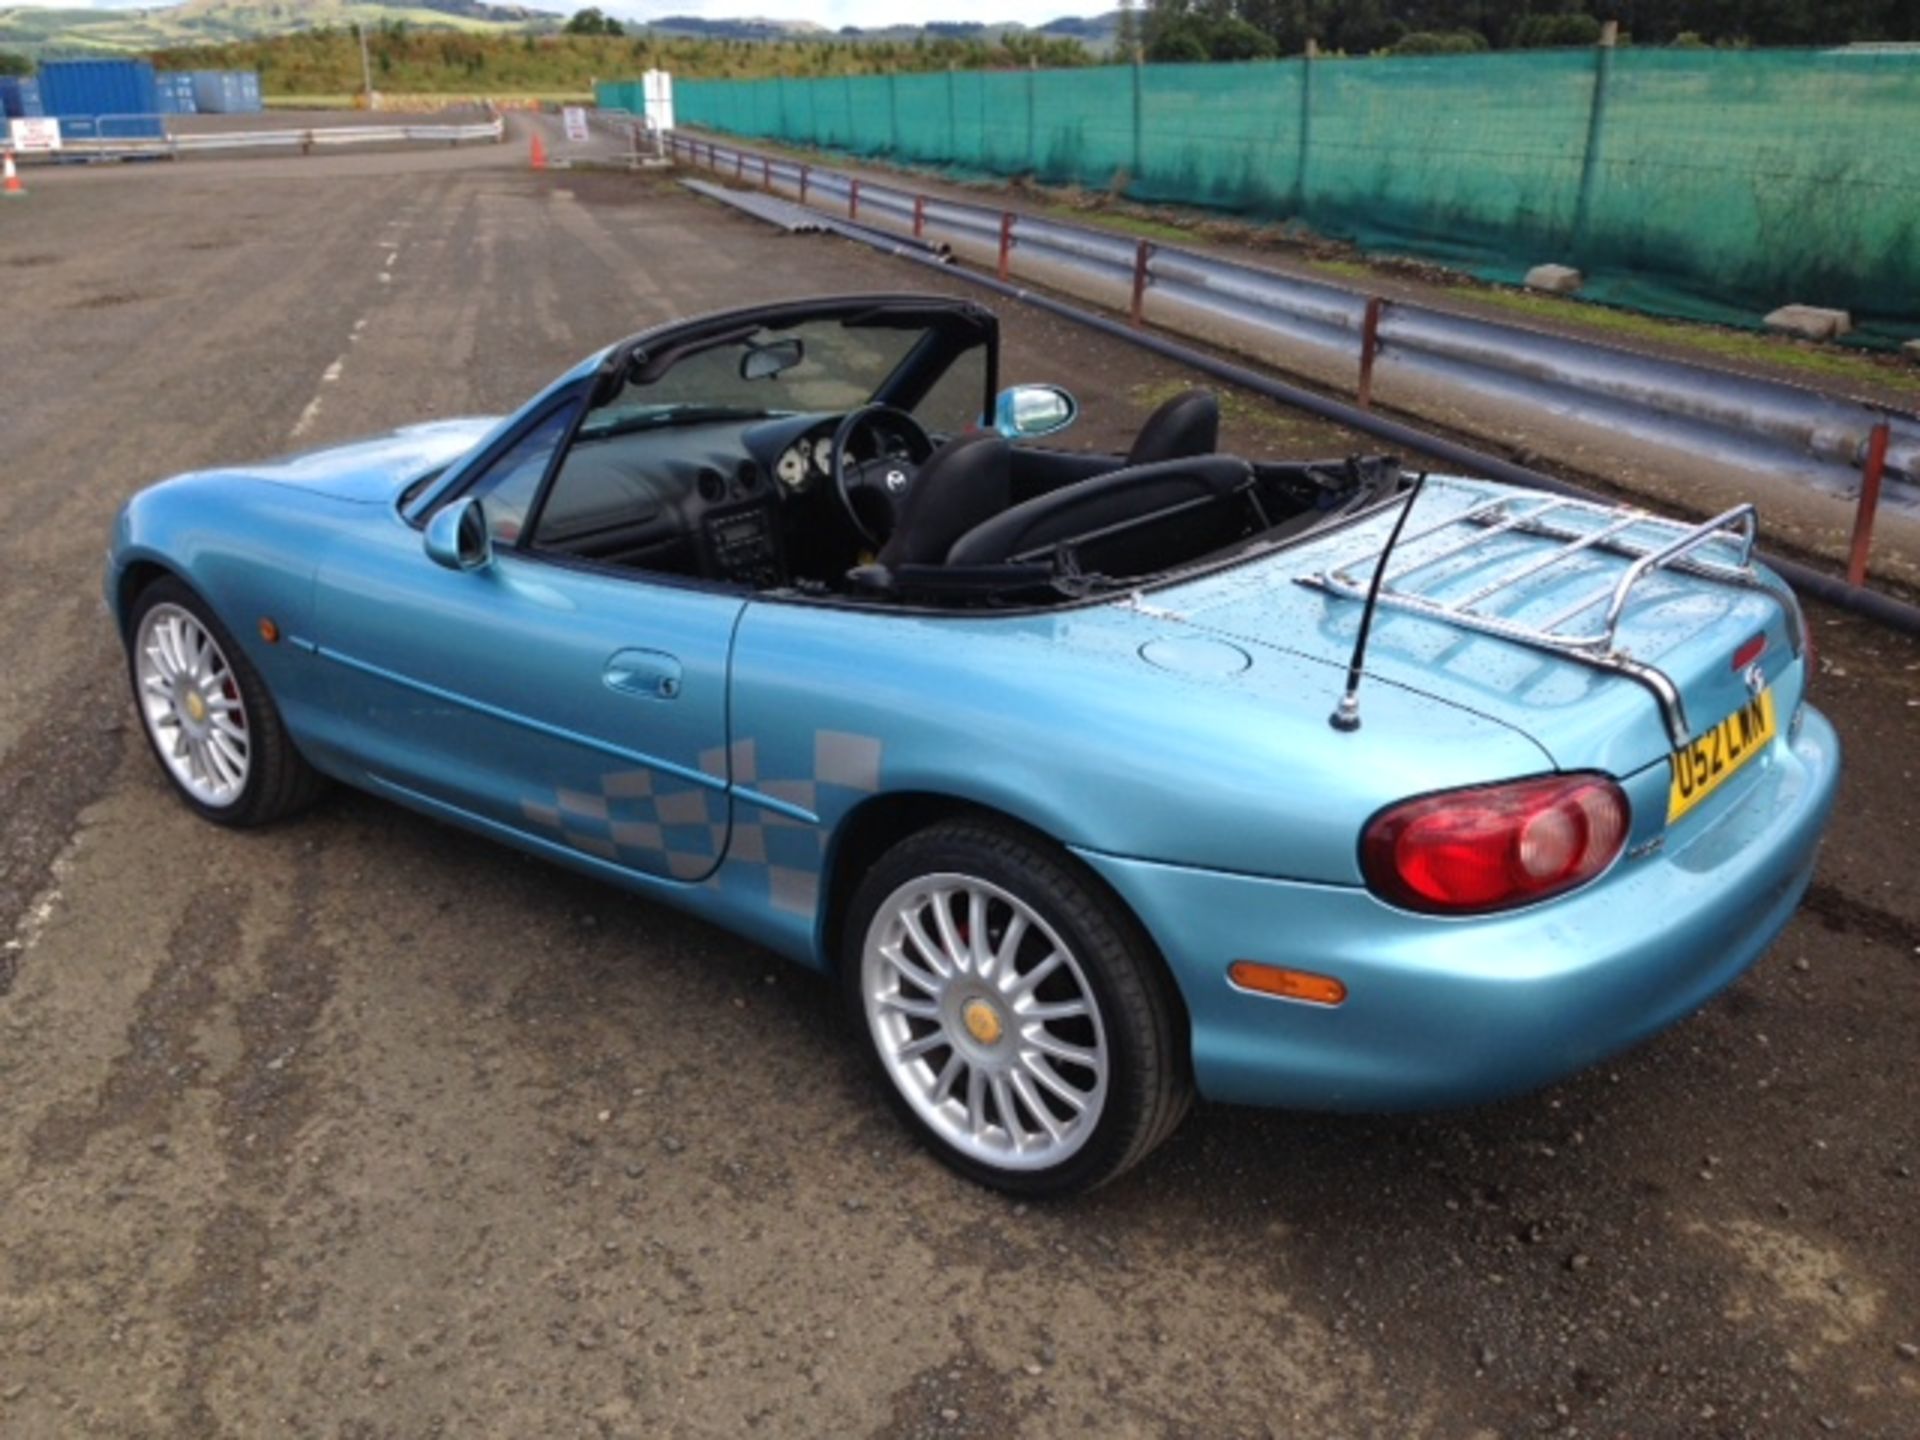 MAZDA, MX-5 1.8I - 1840cc, Chassis number JMZNB18P200223449 - presented in Crystal Blue Metallic, - Image 11 of 11